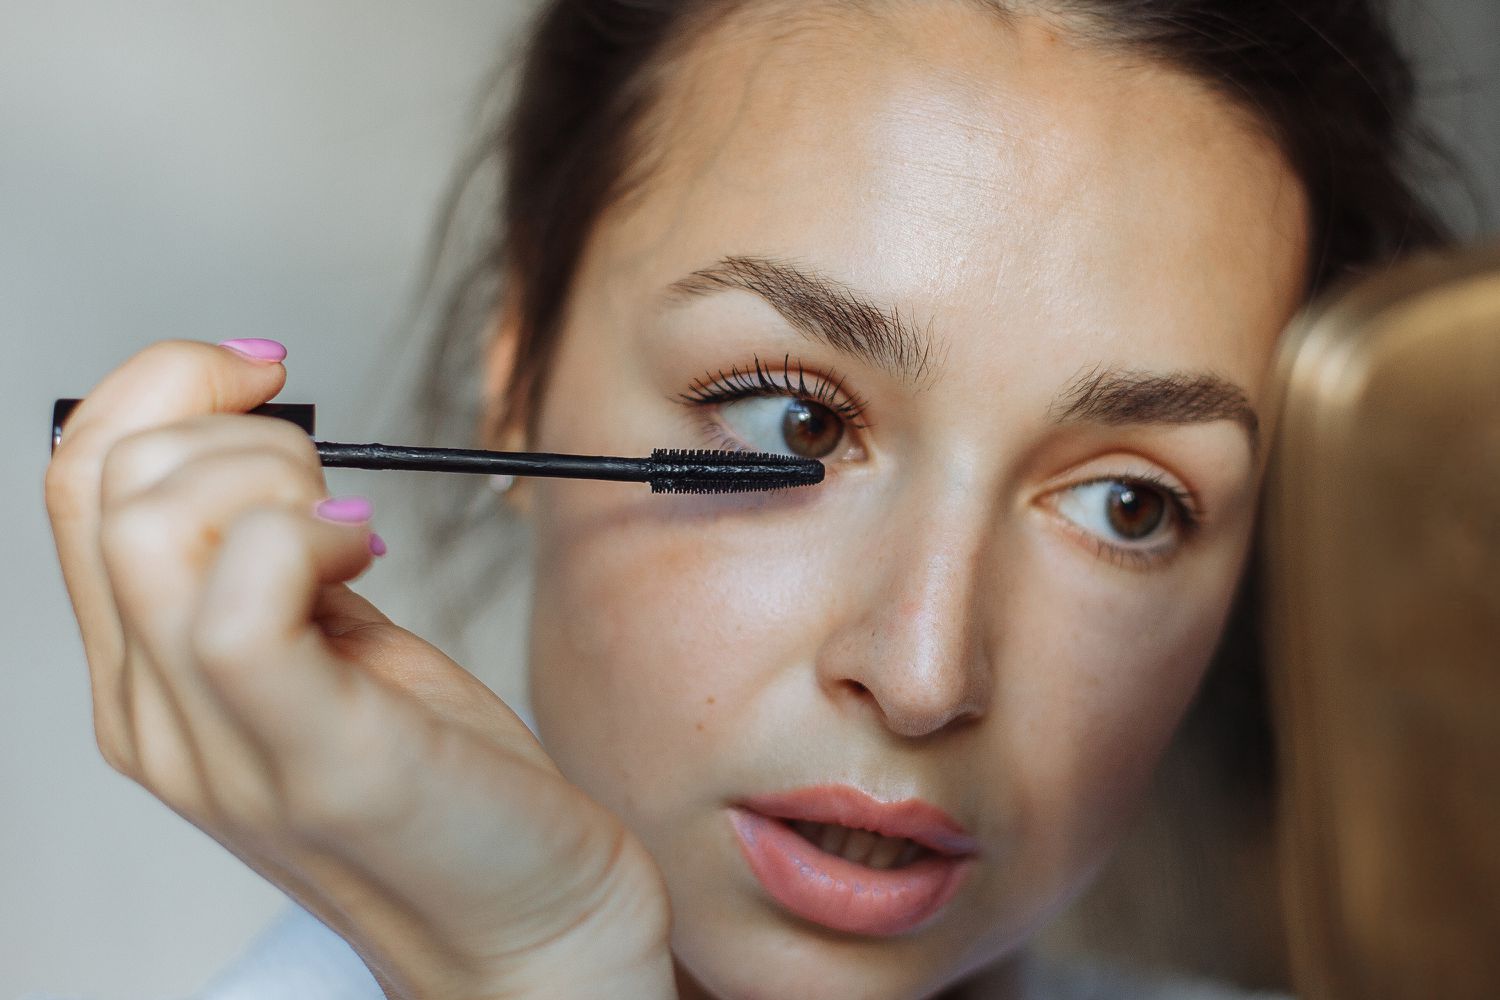 Are Lash Growth Serums Causing Undereye Bags?